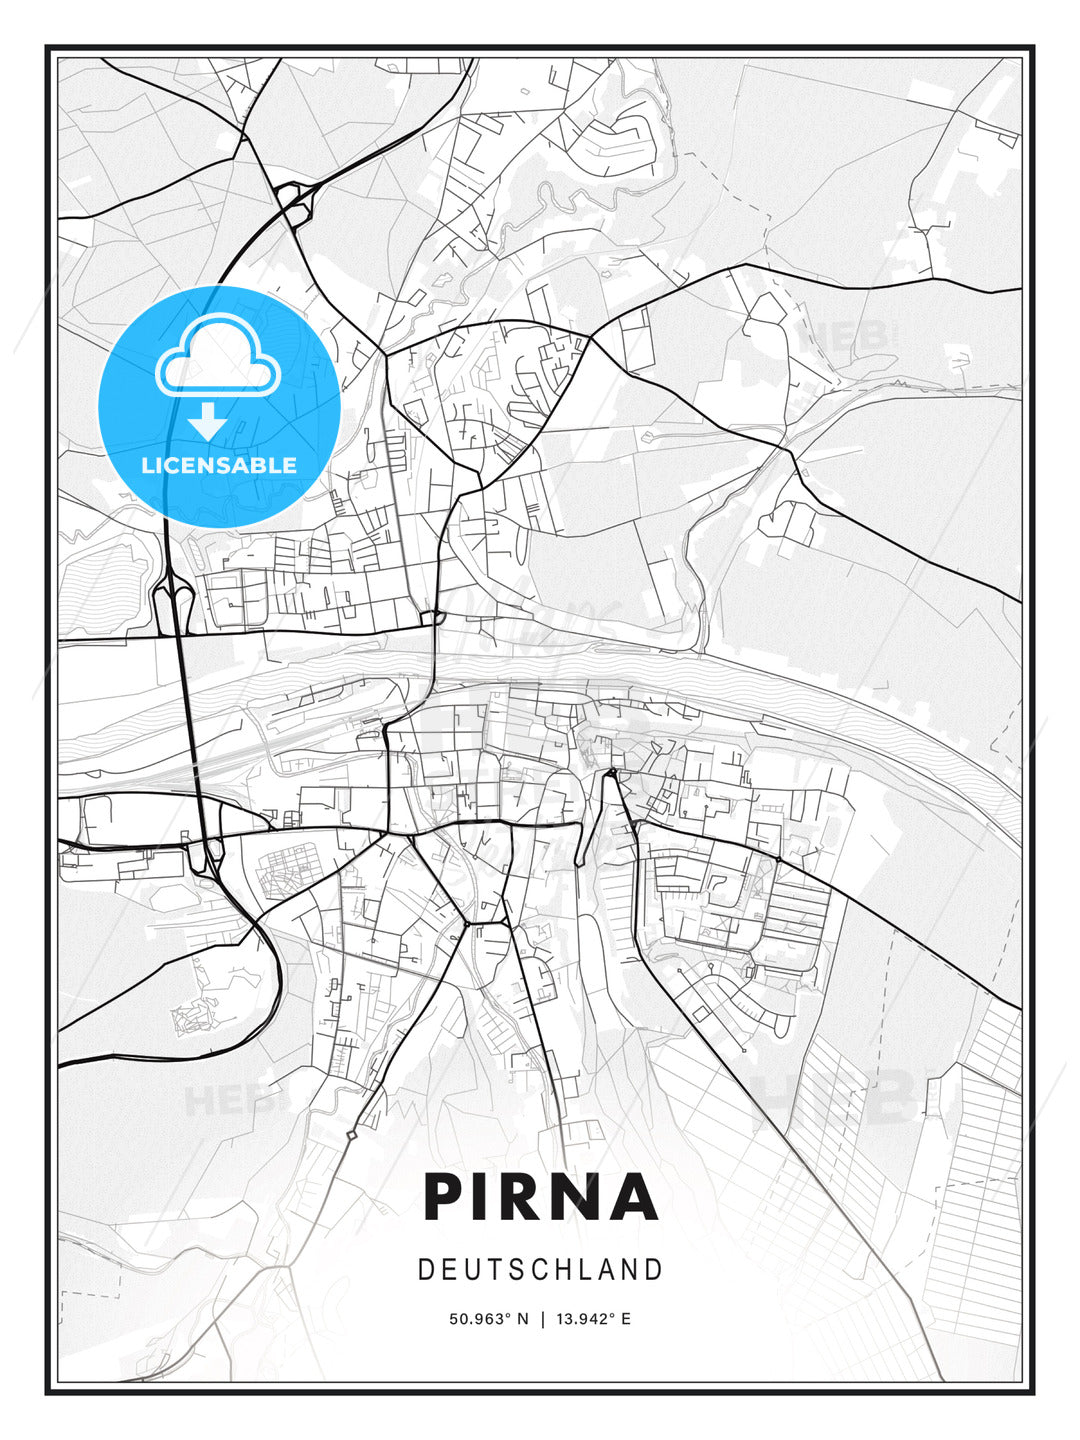 Pirna, Germany, Modern Print Template in Various Formats - HEBSTREITS Sketches